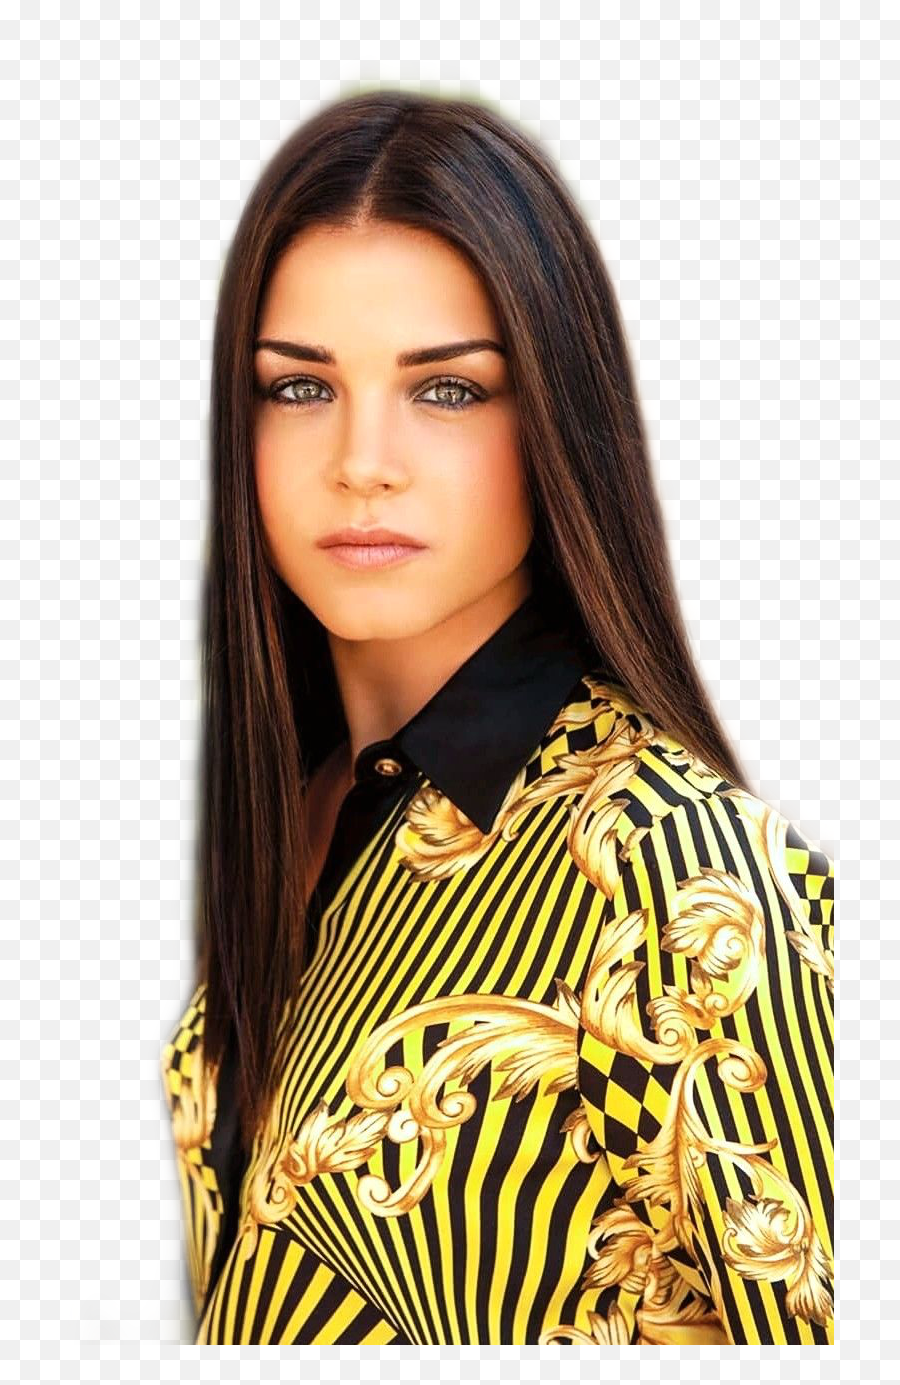 The Most Edited Marie Avgeropoulos Picsart Emoji,Marie Avgeropoulos Png